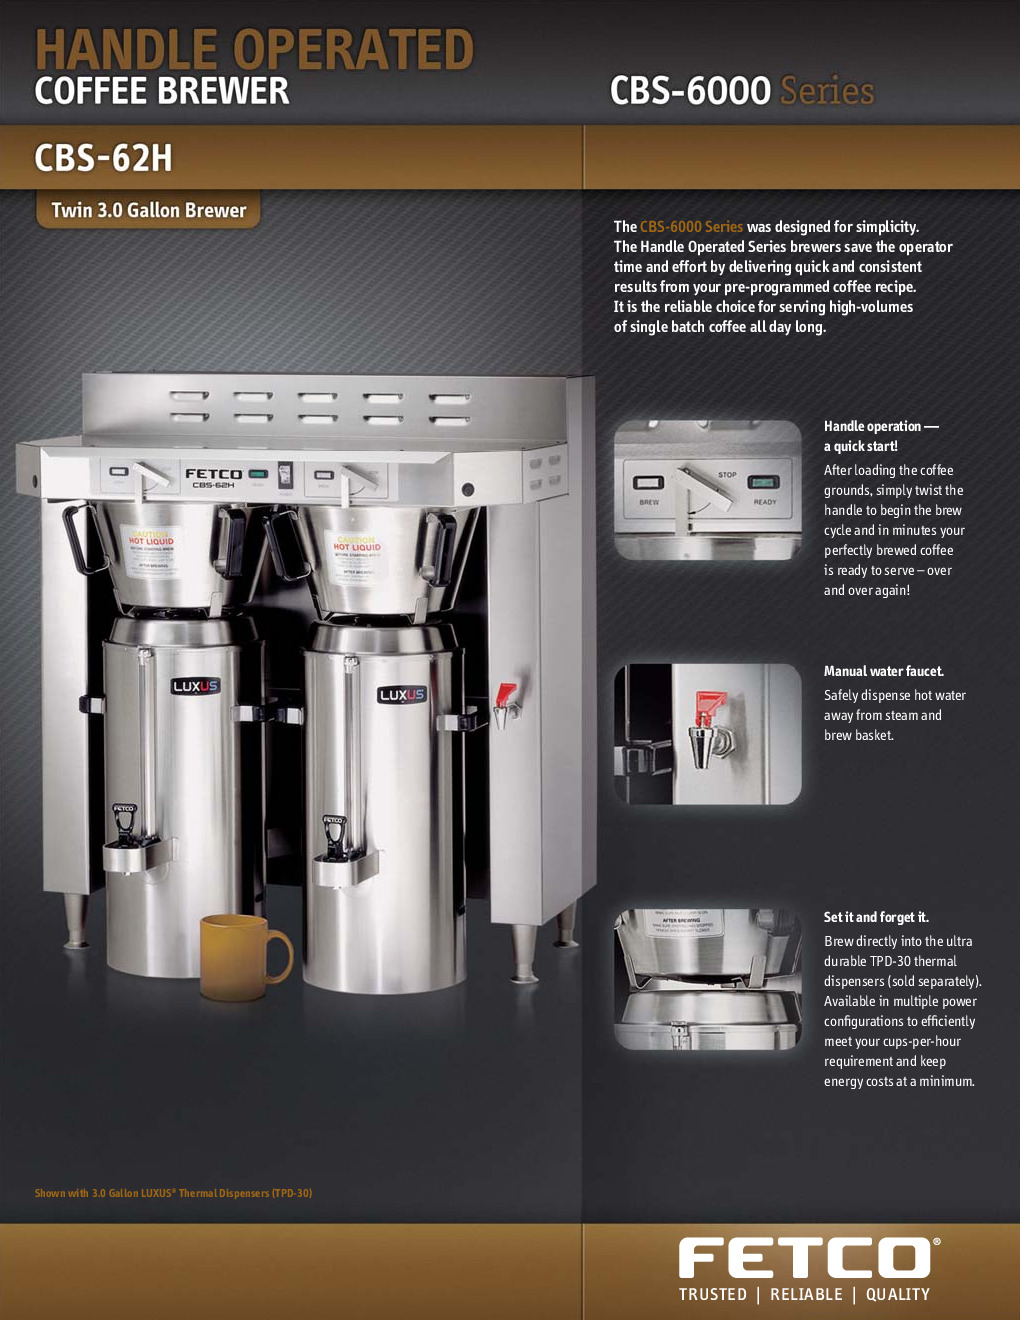 FETCO CBS-62H (C62056) Coffee Brewer for Thermal Server